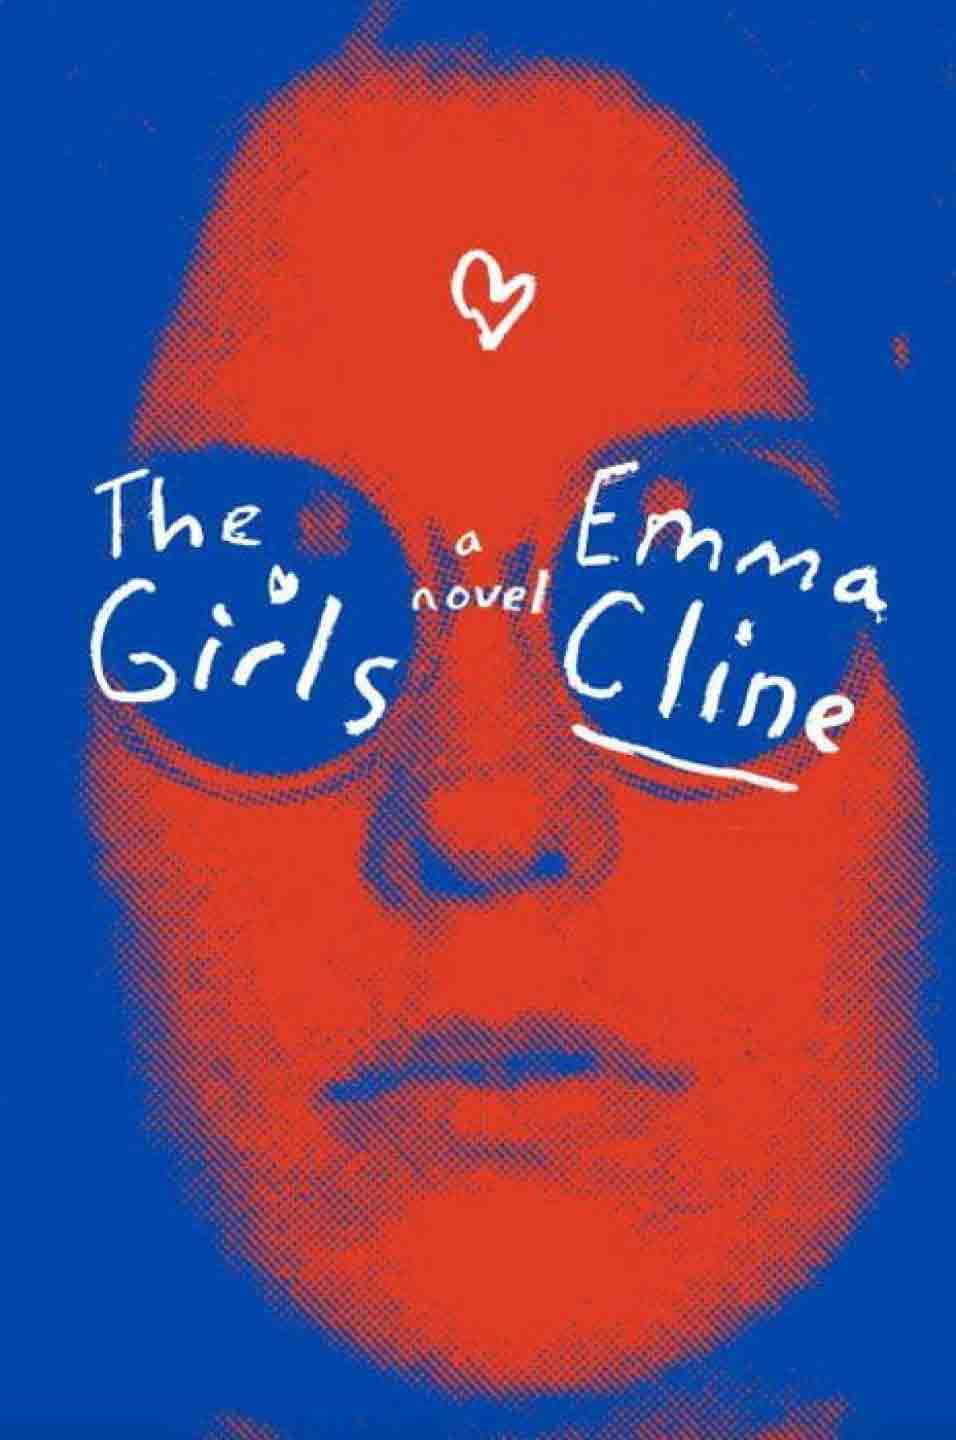 NORTHERN CALIFORNIA: THE GIRLS BY EMMA CLINE